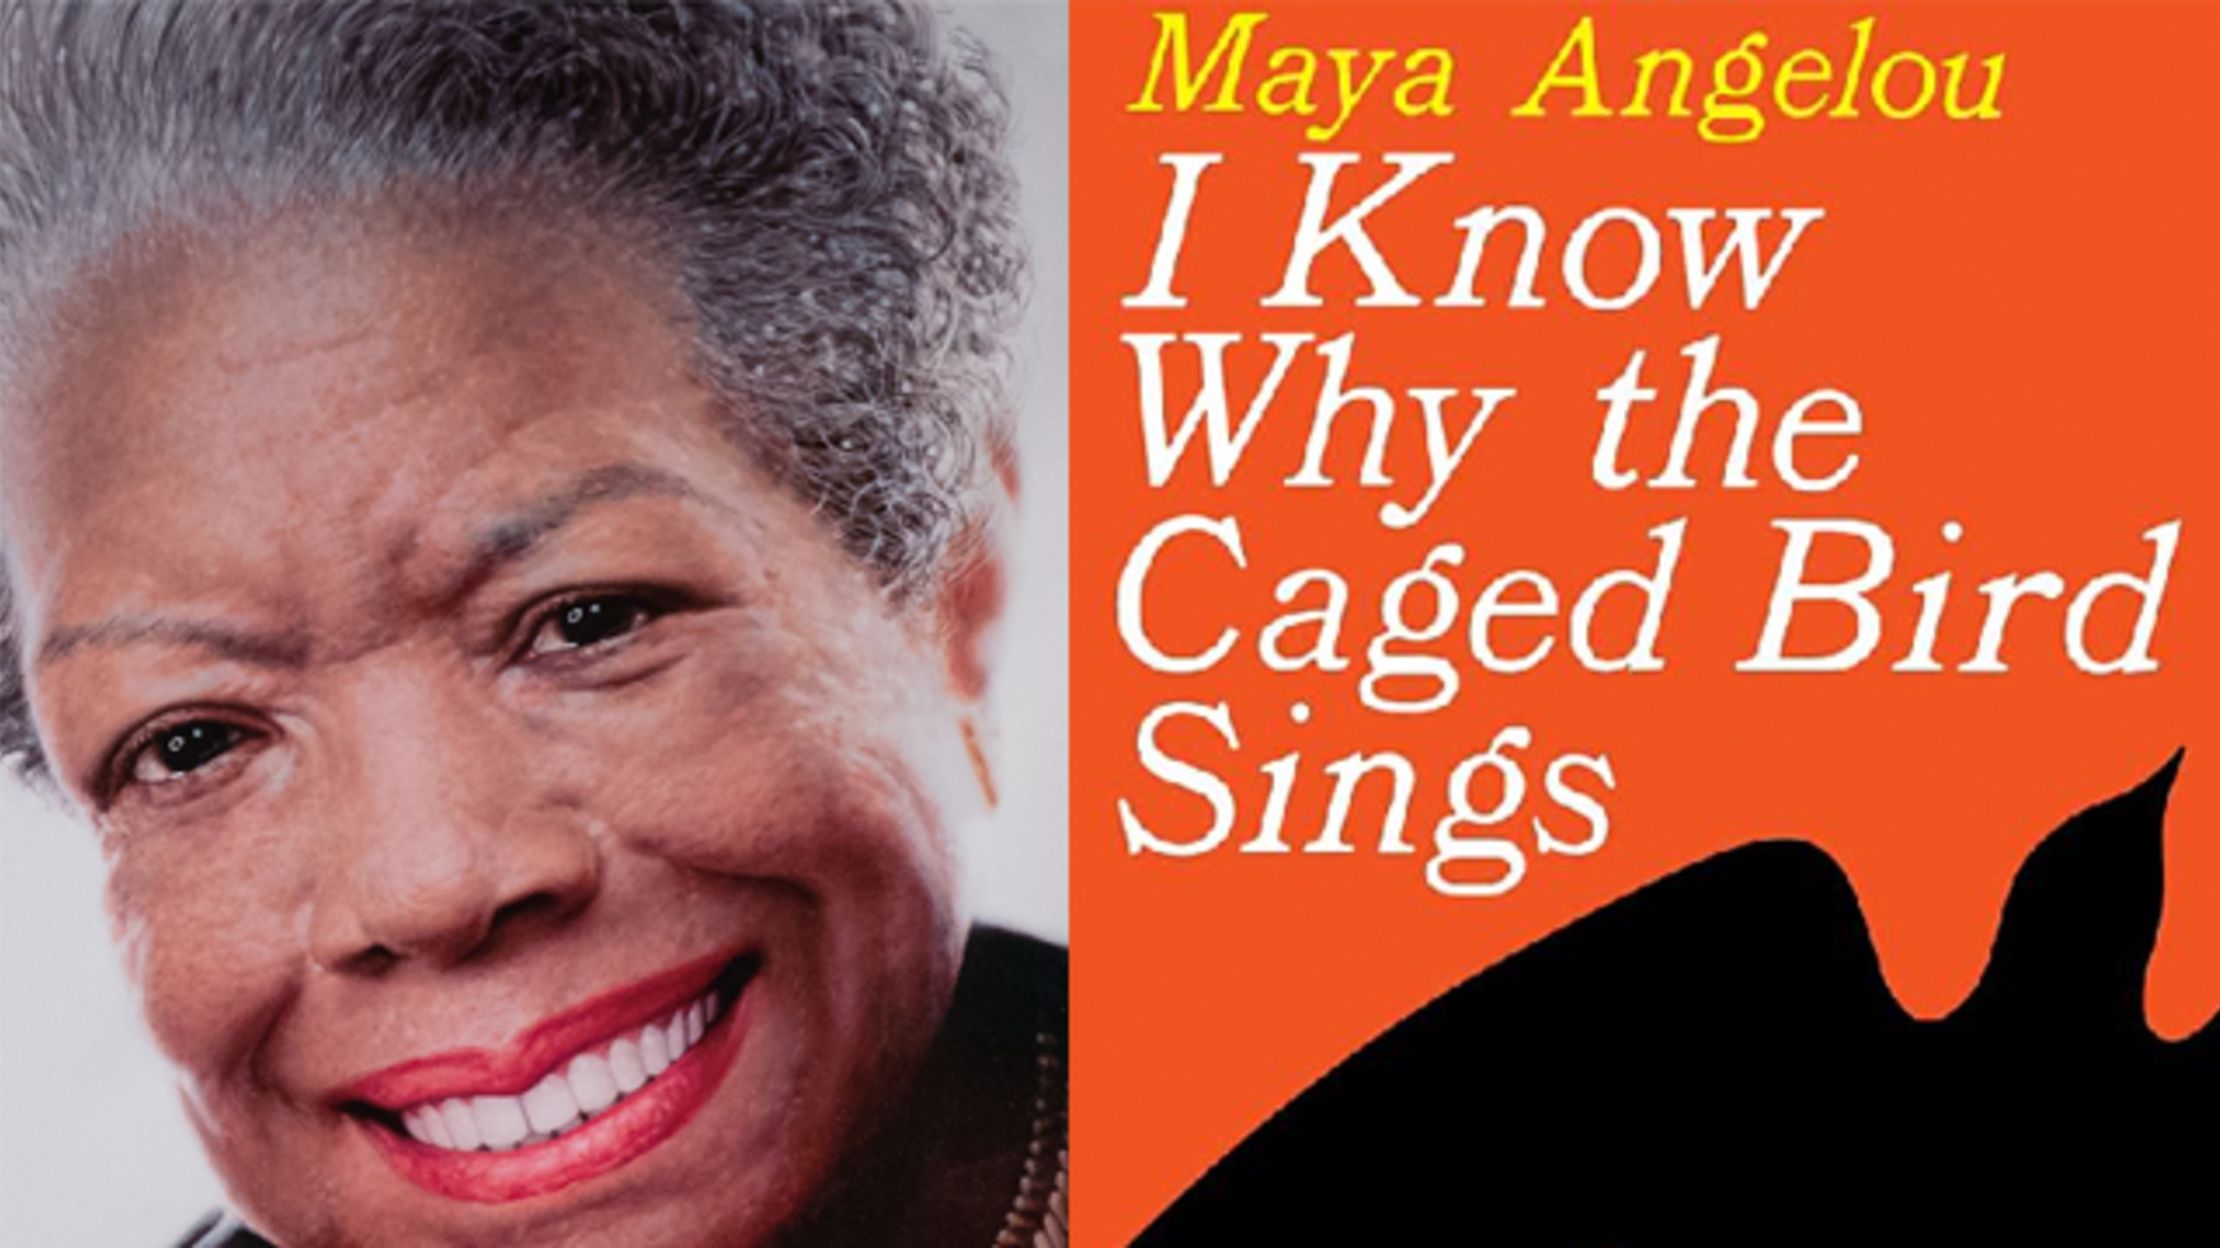 i know why the caged bird sings amazon